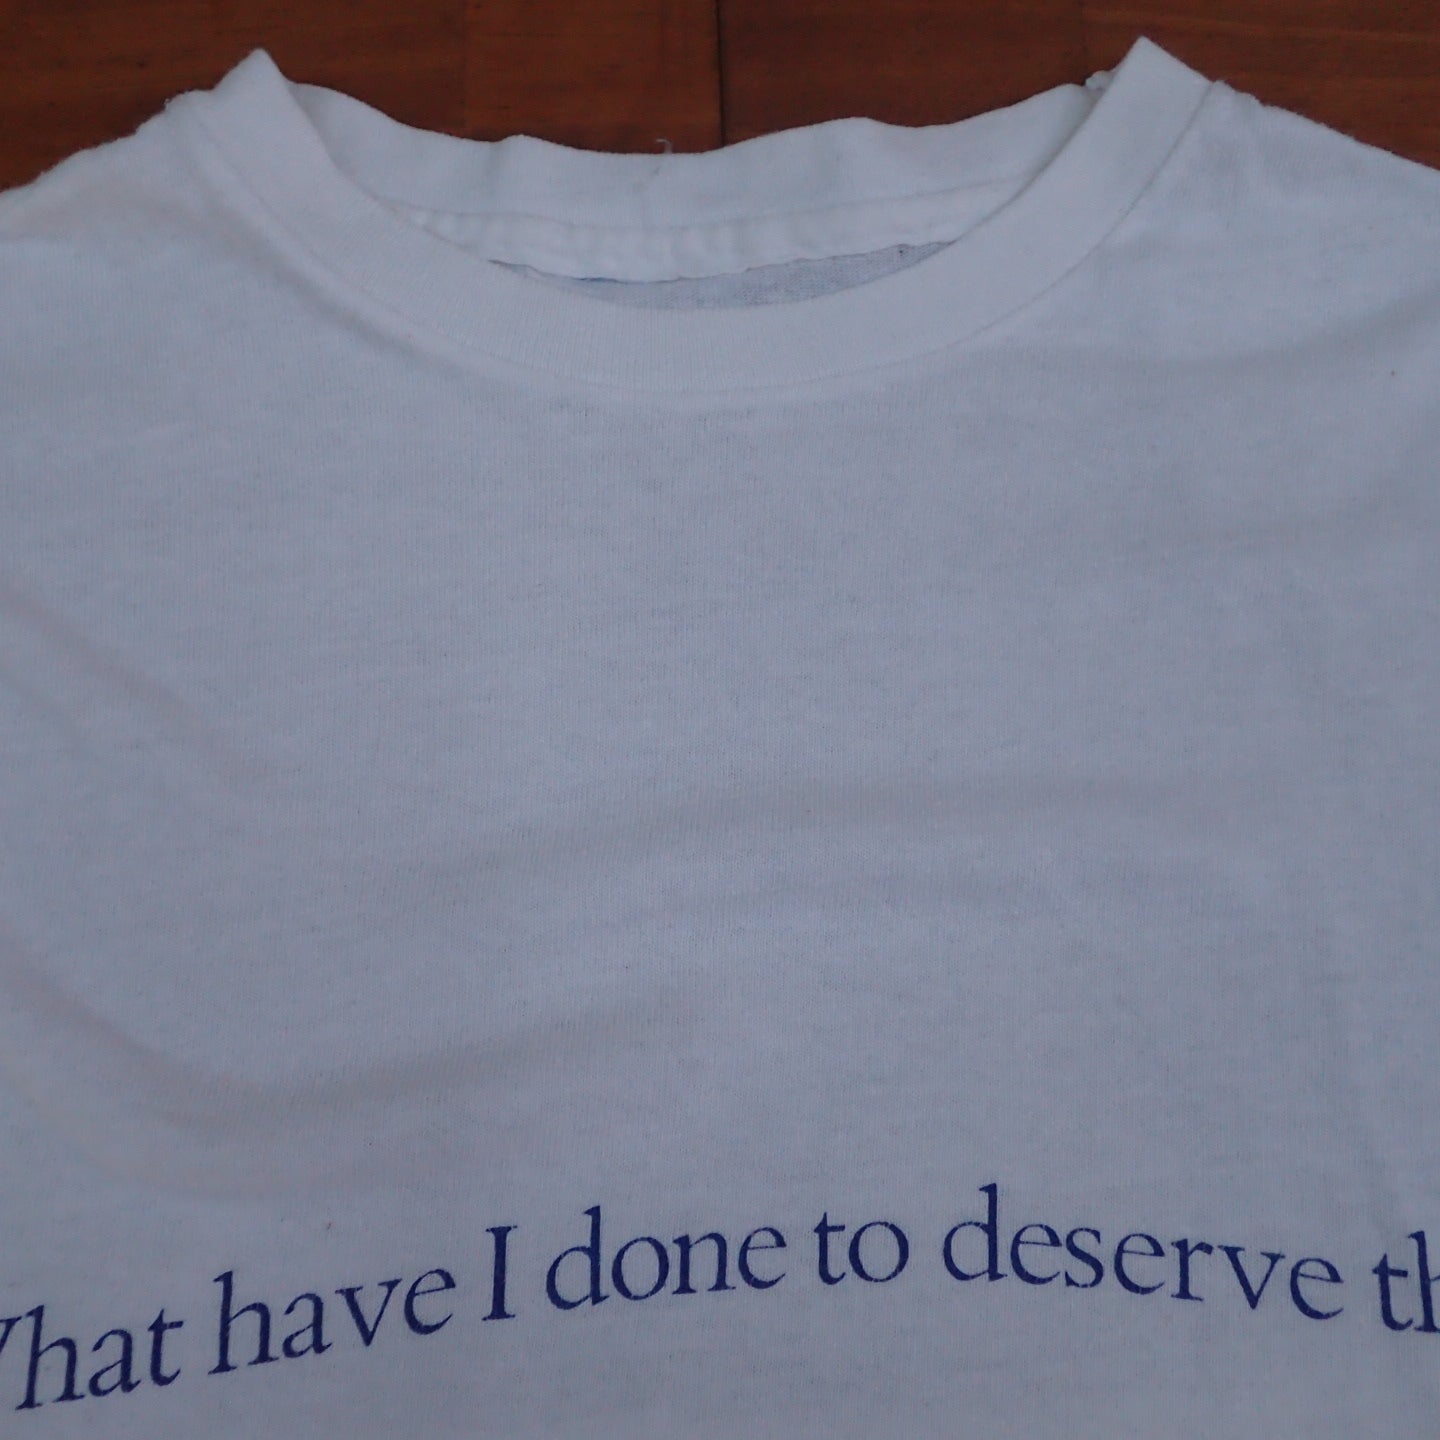 80s Pet Shop Boys " What Have I Done To Deserve This? Tee"